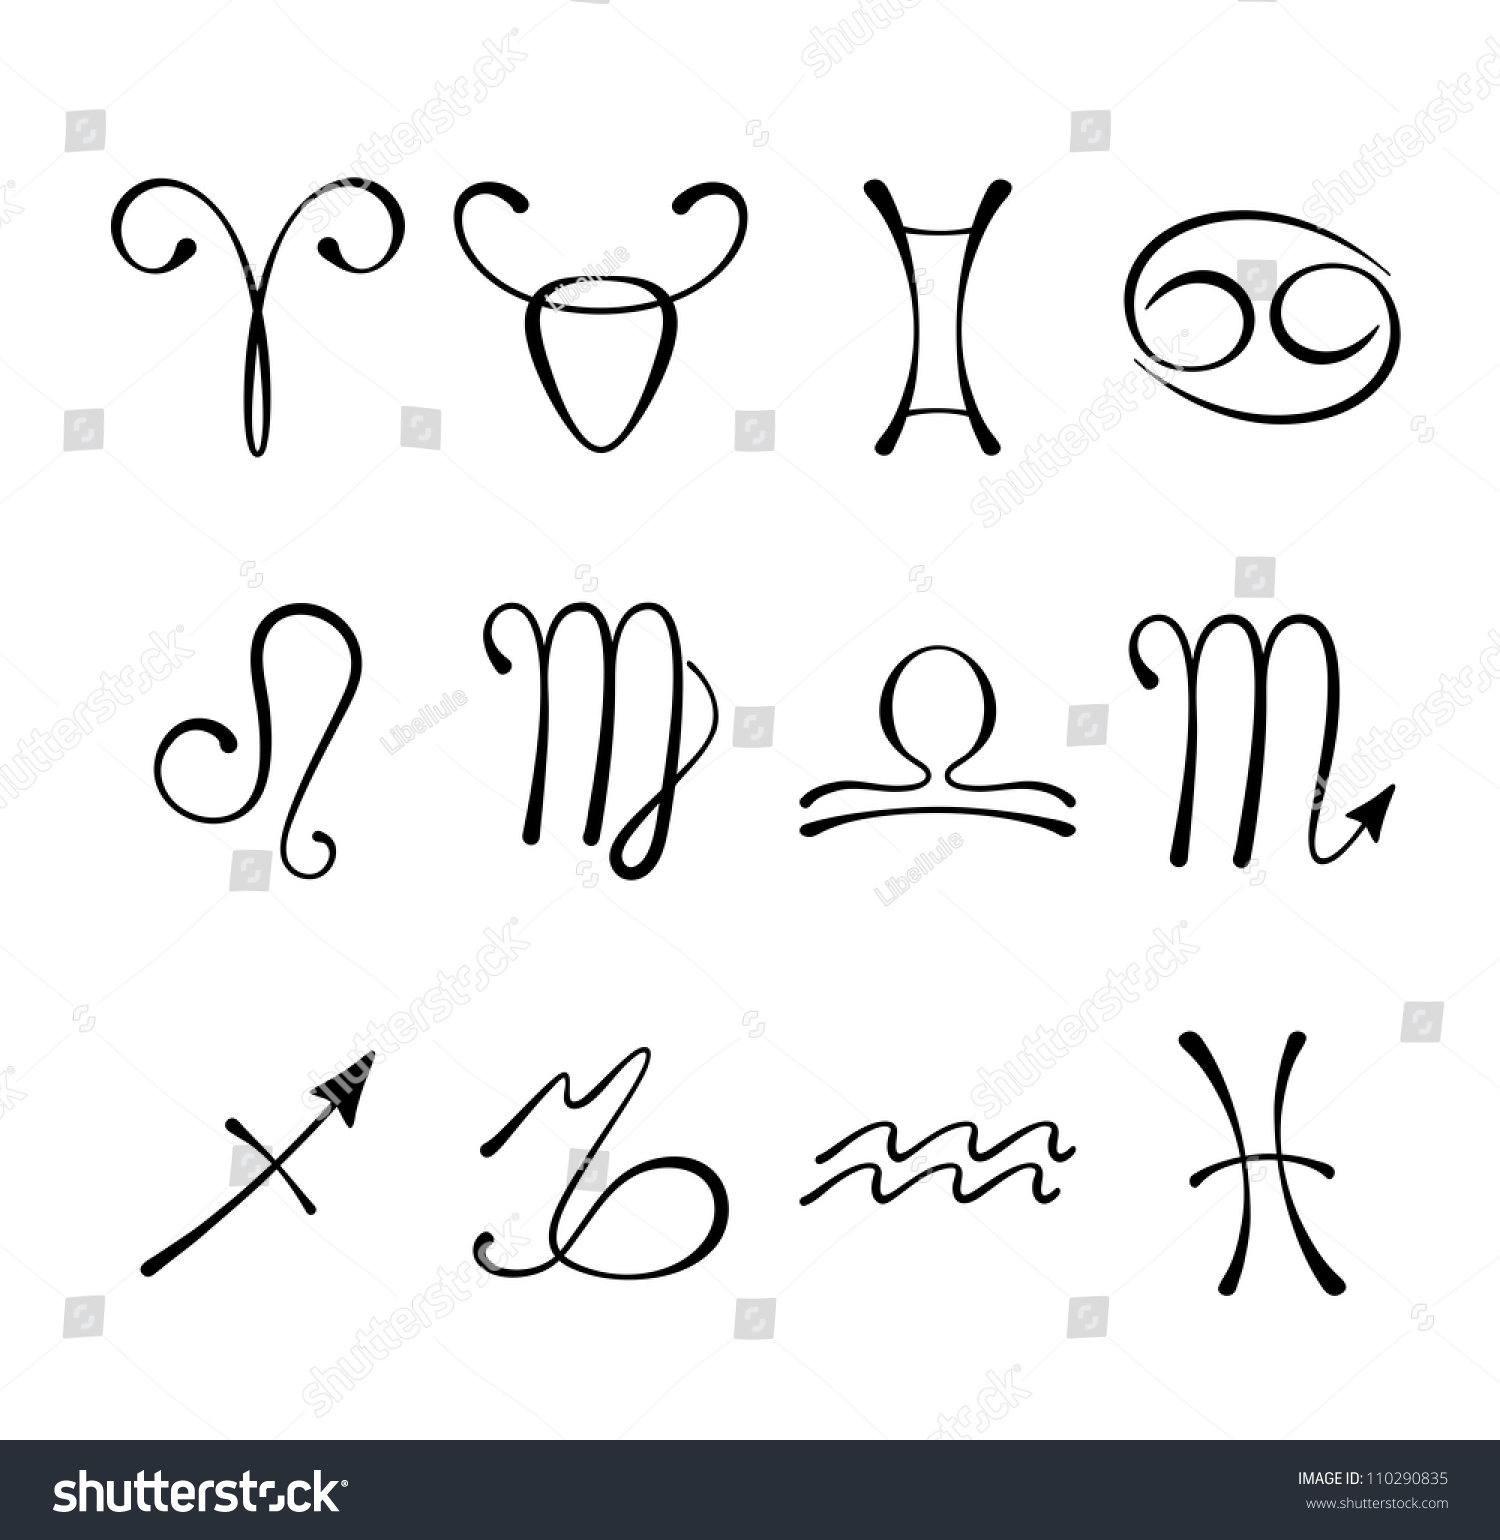 Graphical Astrological Symbols Stock Vector Illustration 110290835 ...